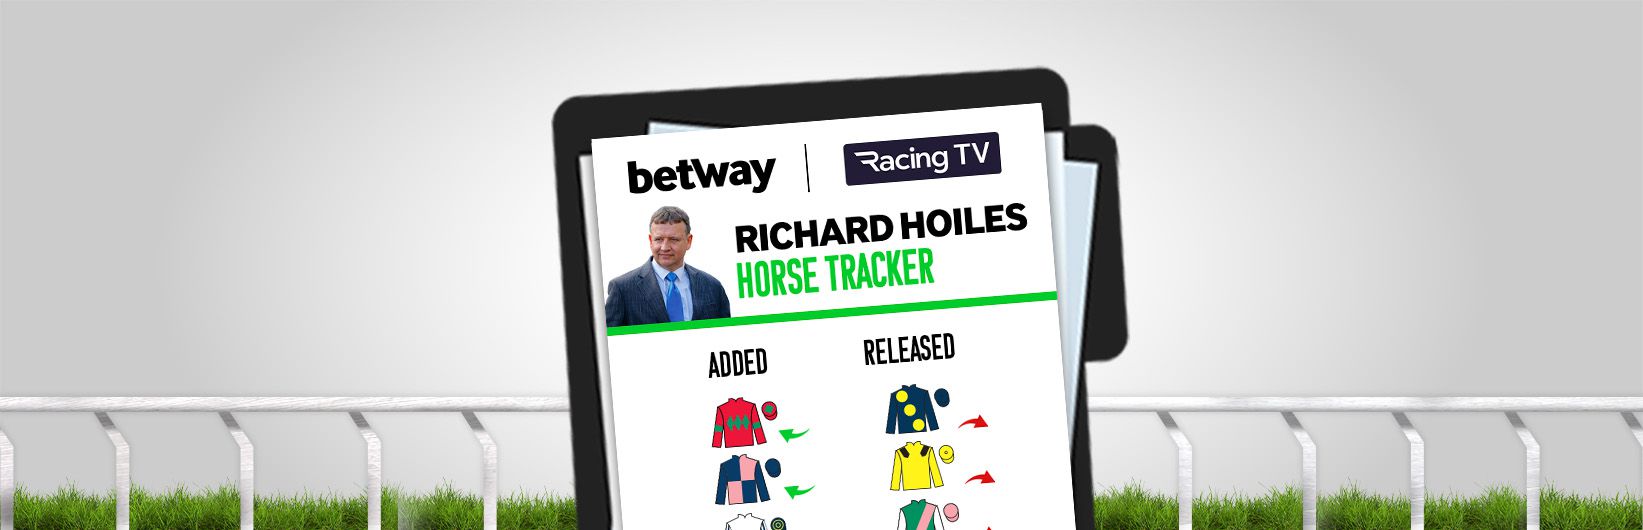 Richard Hoiles: 1 added and 1 released from my horse tracker